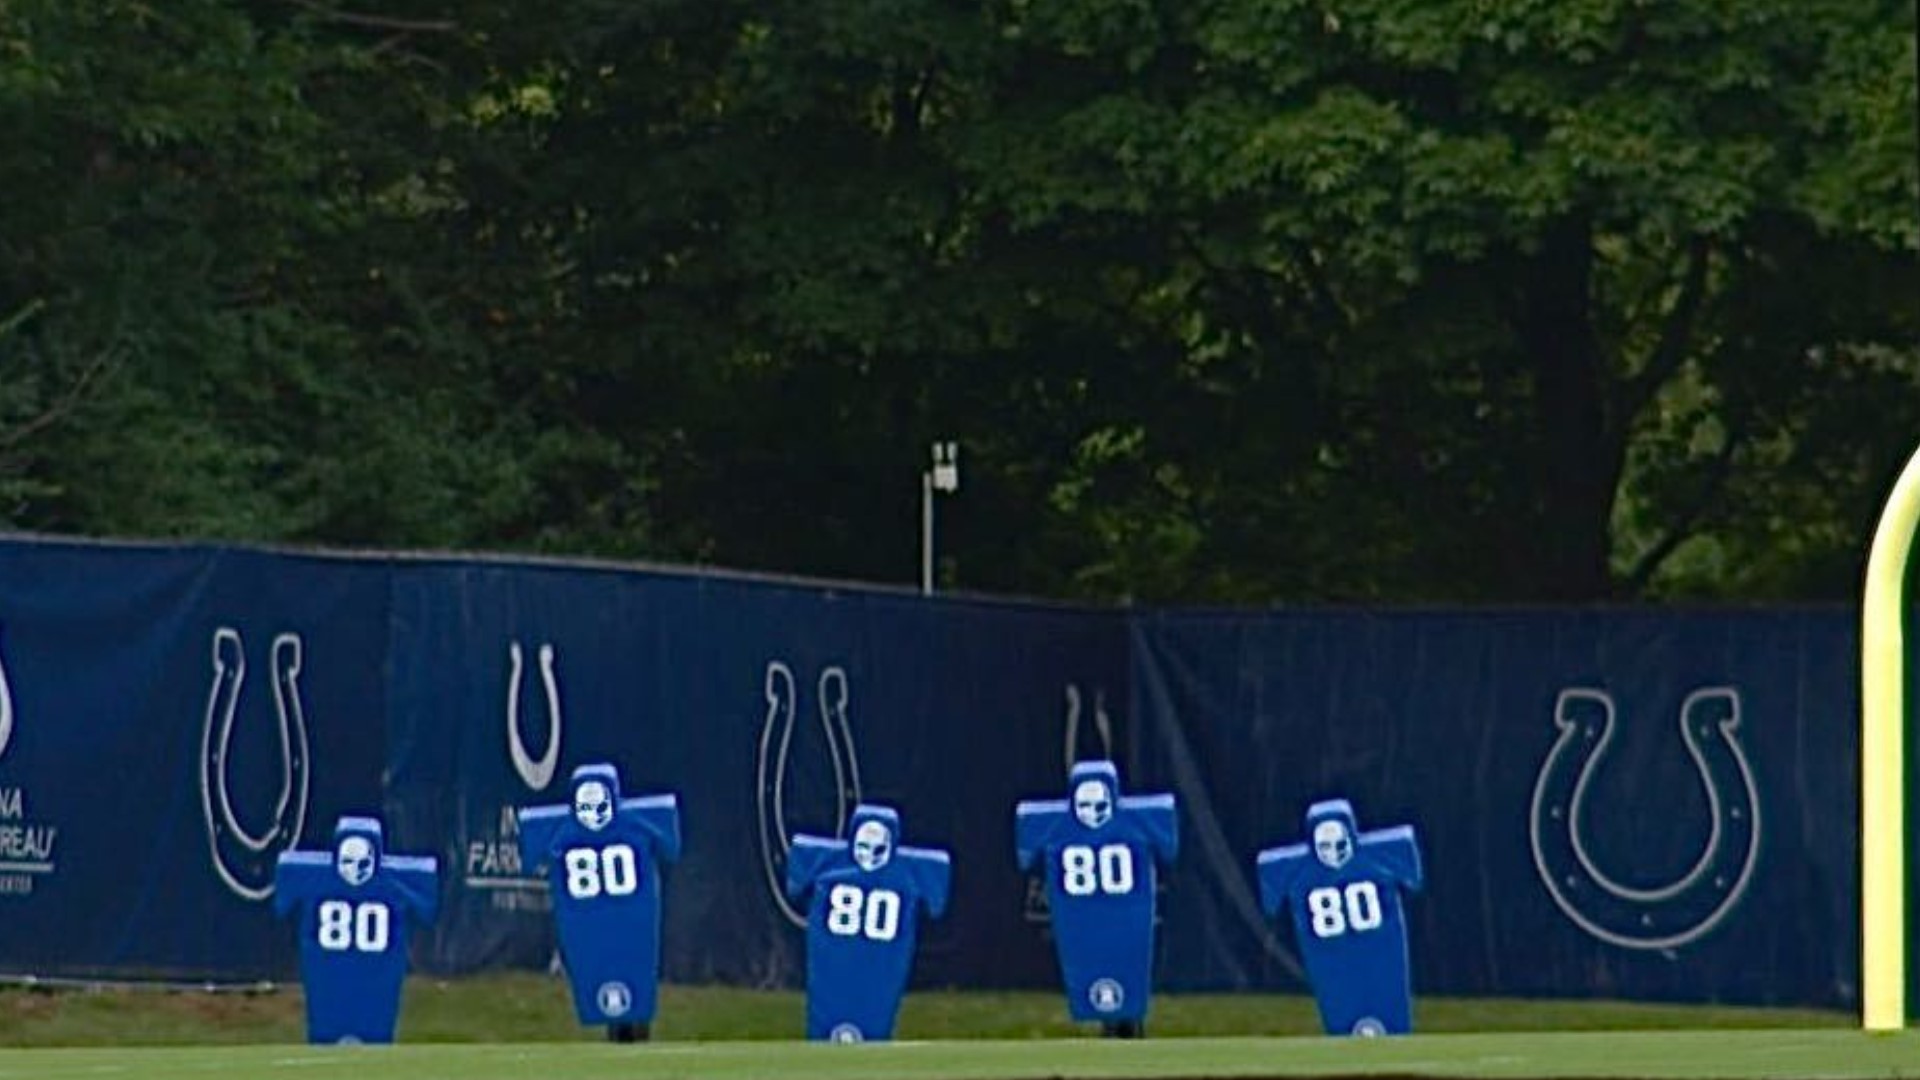 In the wake of the Jacob Blake shooting in Kenosha, Wisconsin, the Indianapolis Colts canceled practice and instead discussed ways to make change in the community.